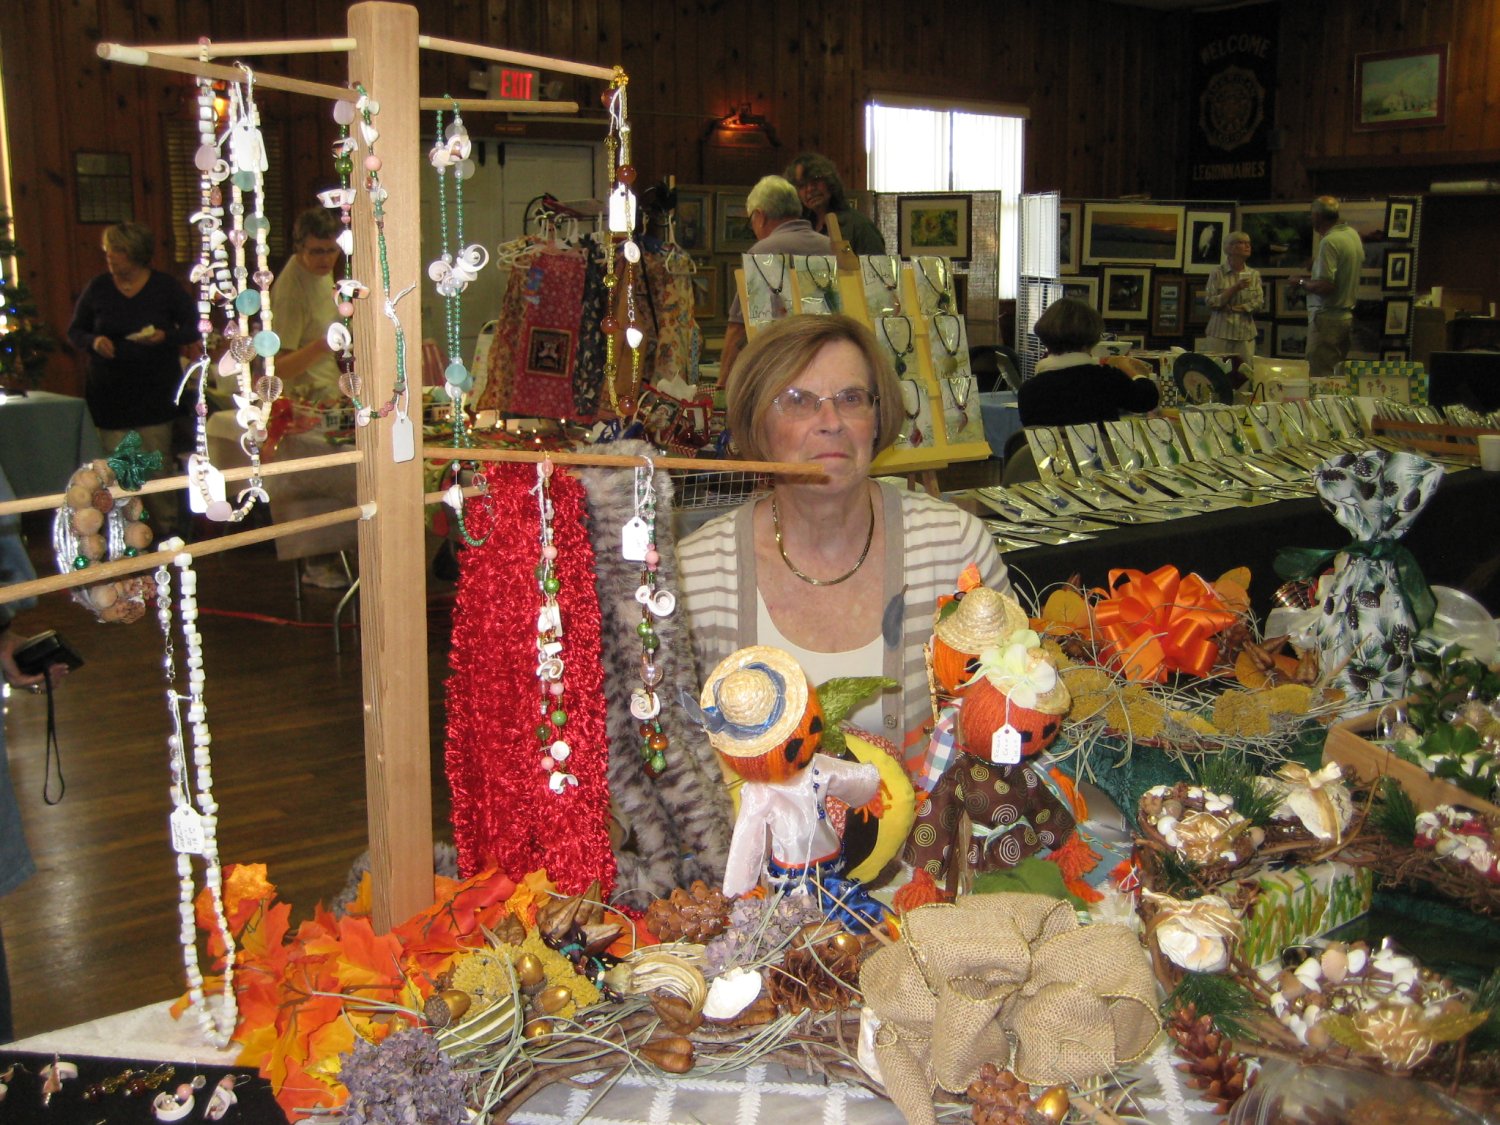  Julie Tompkins exhibited oyster and okra angels, Christmas balls, shell ornaments, and more.  